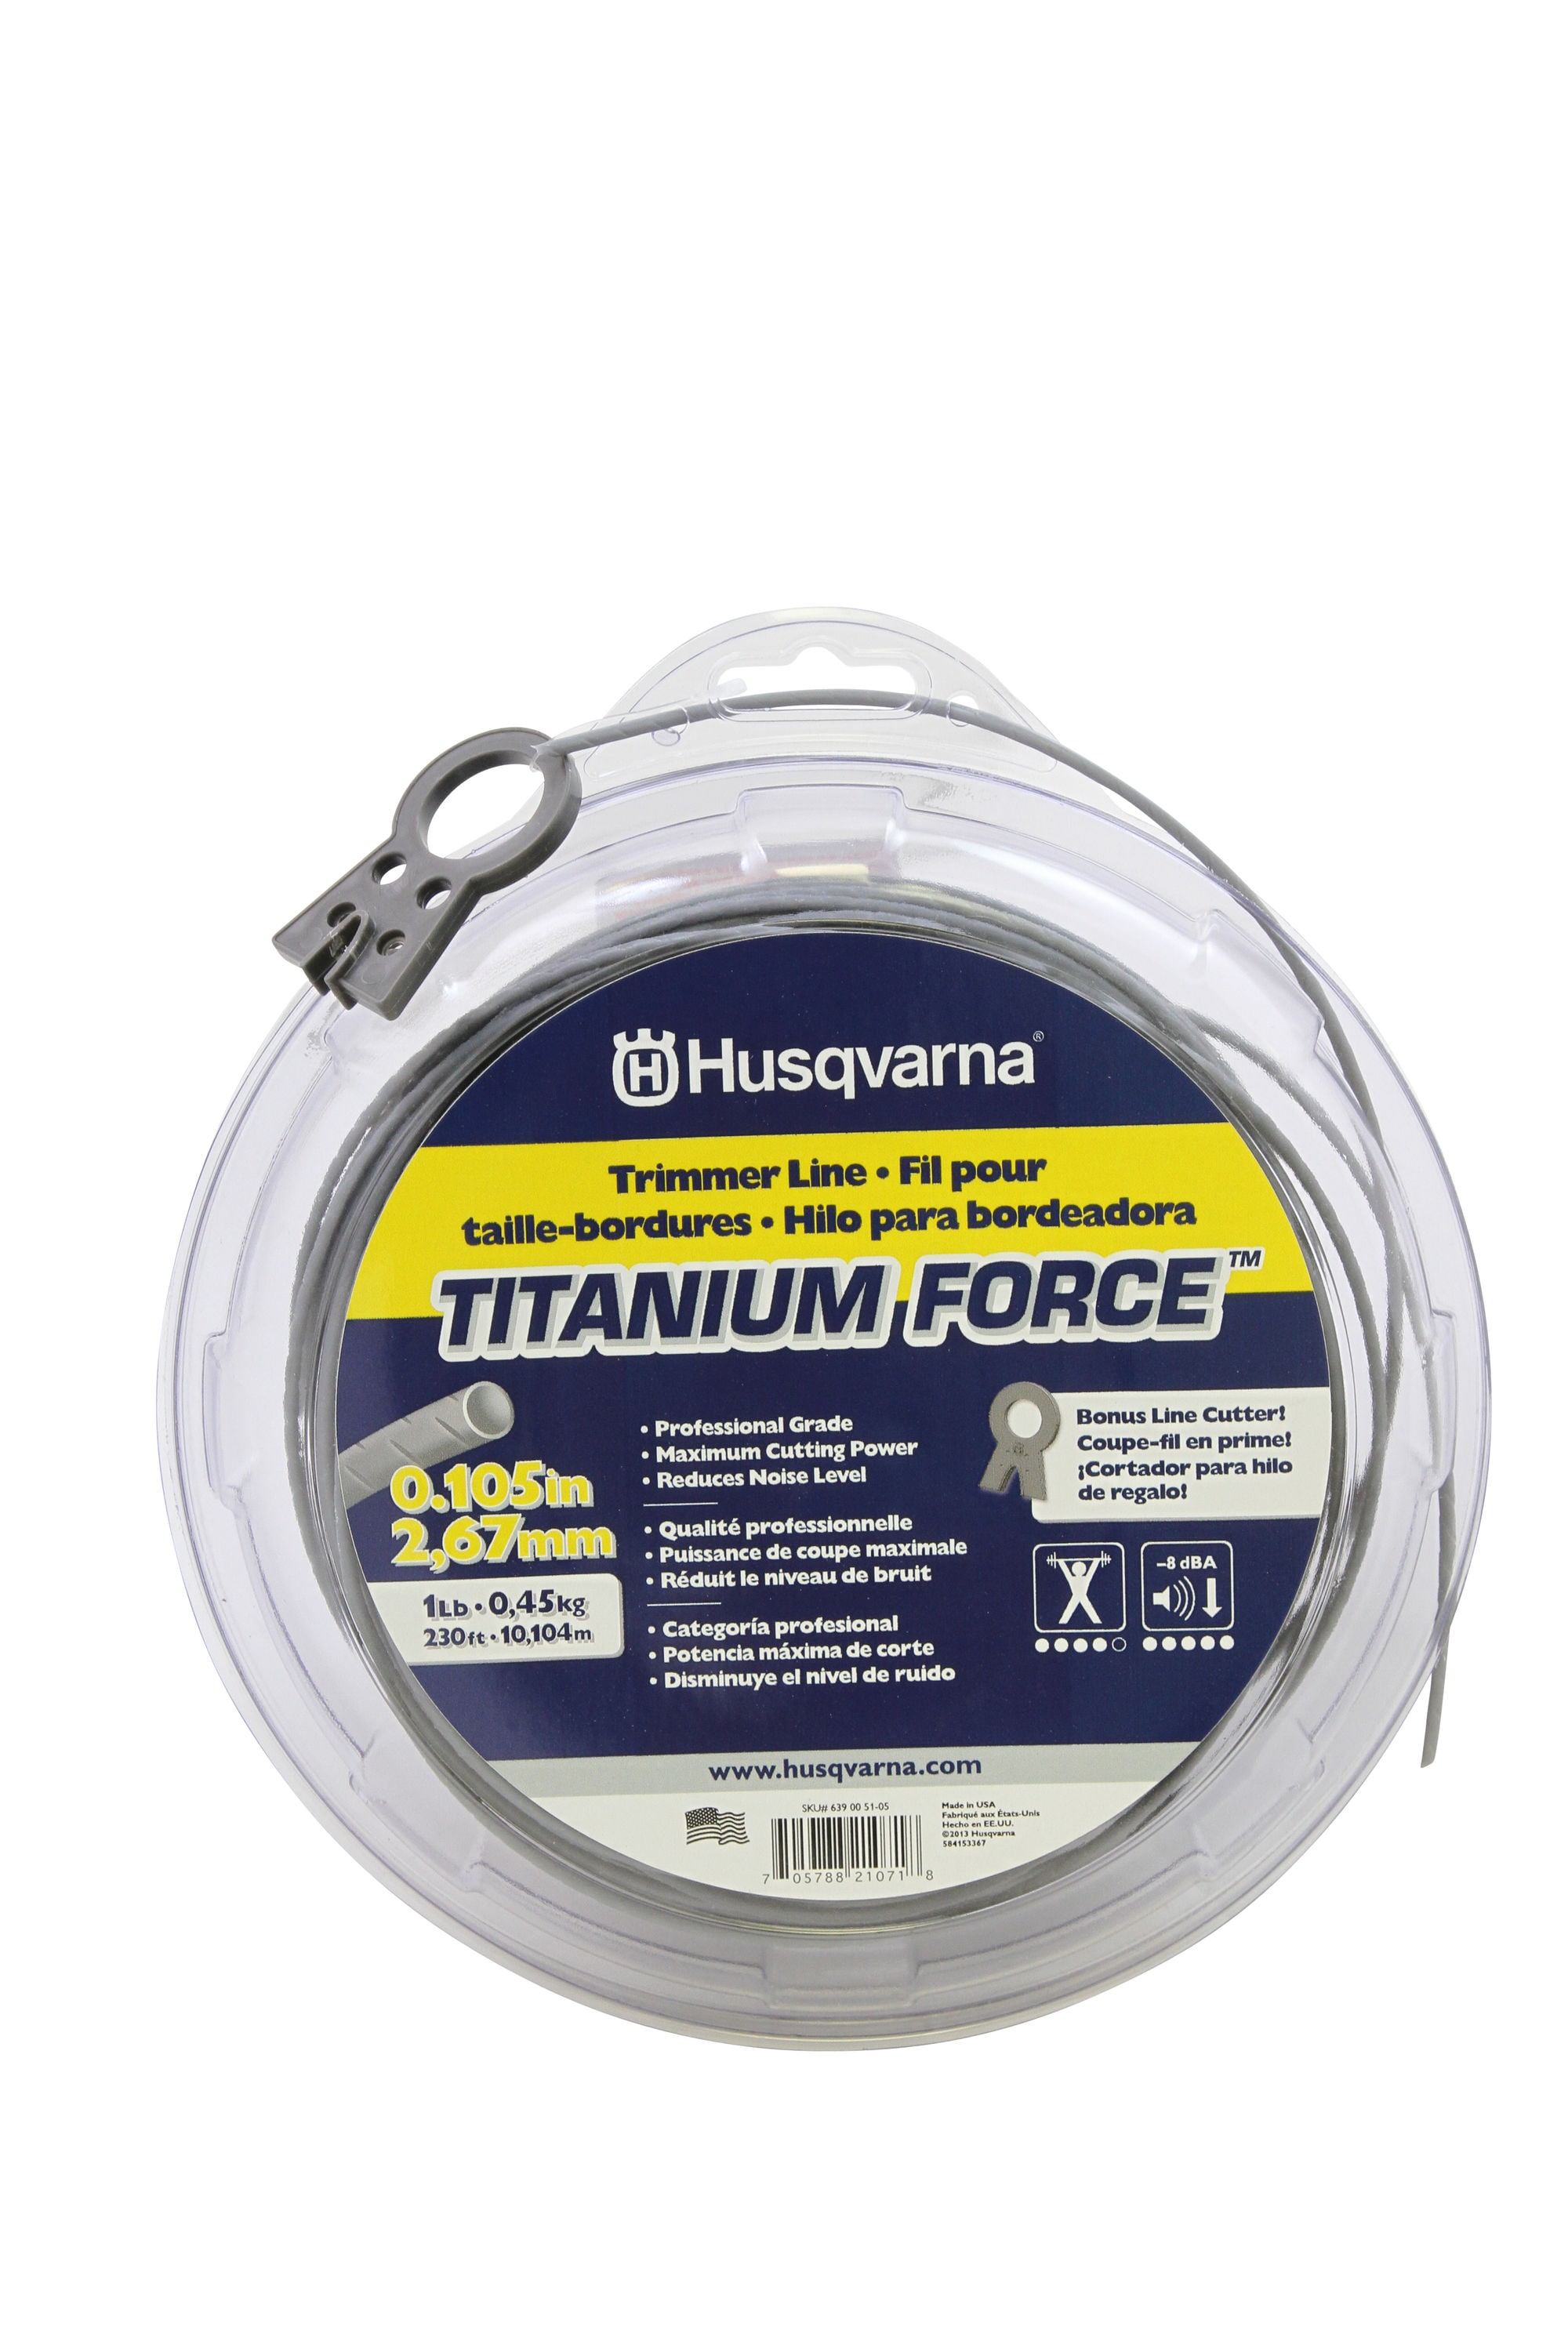 Details about   2 Pack Husqvarna TITANIUM FORCE 0.095-Inch 200-Foot  heavy-duty trimmer line 